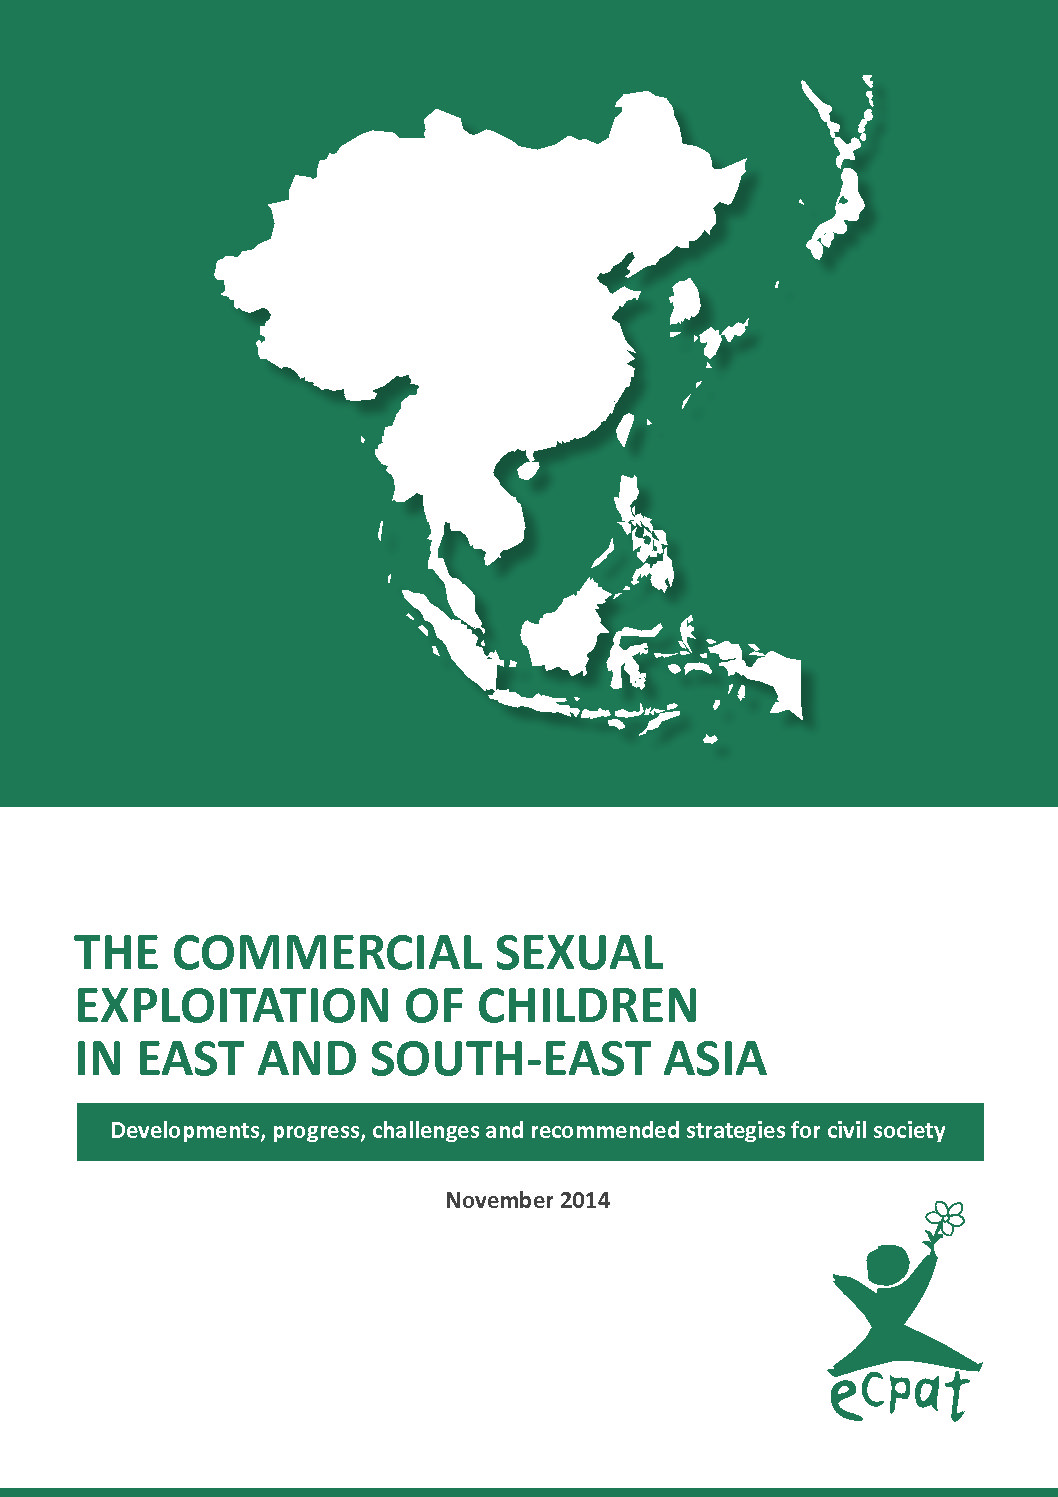 The Commercial Sexual Exploitation of Children in East and Southeast Asia